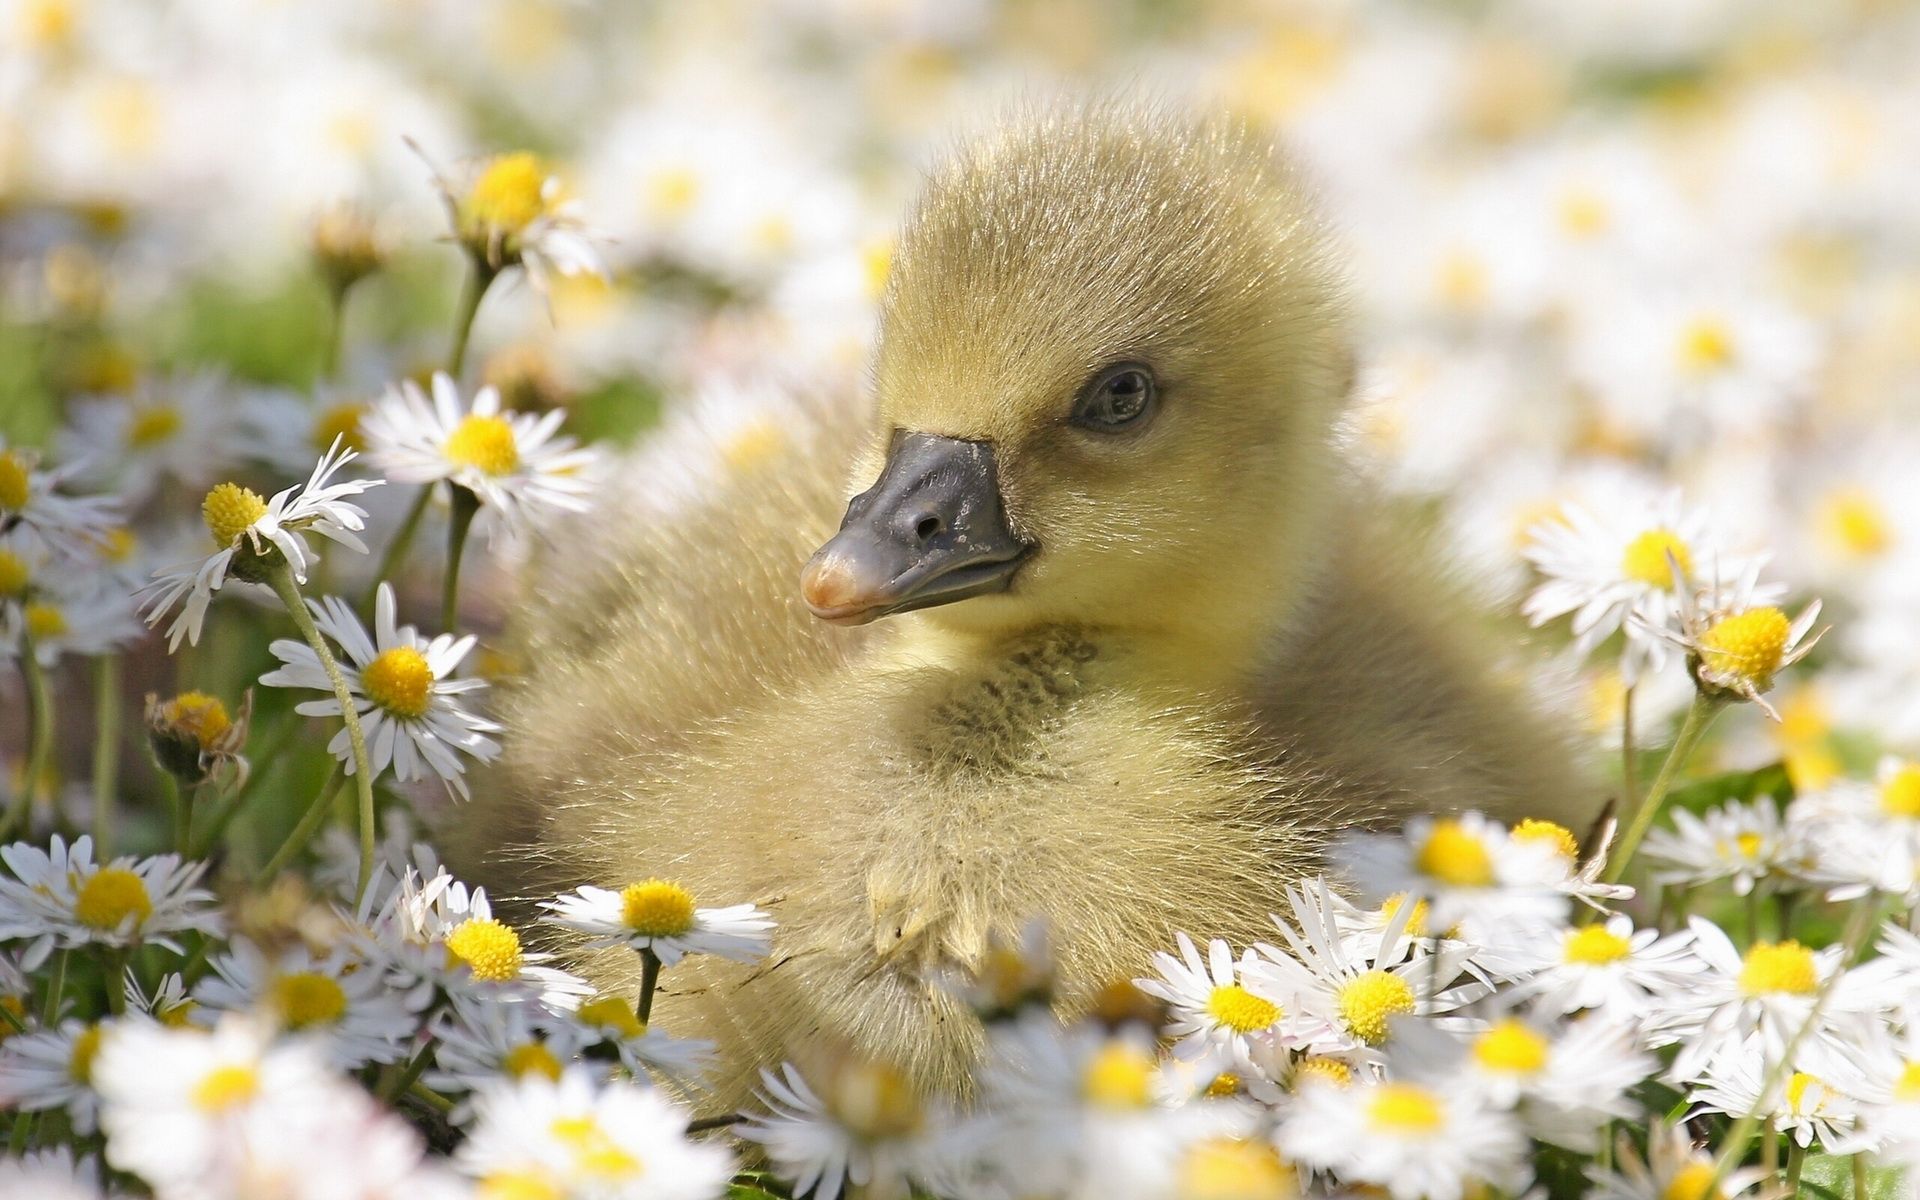 A cute duckling sitting in a field of daisies with a brief description of this image - Duck